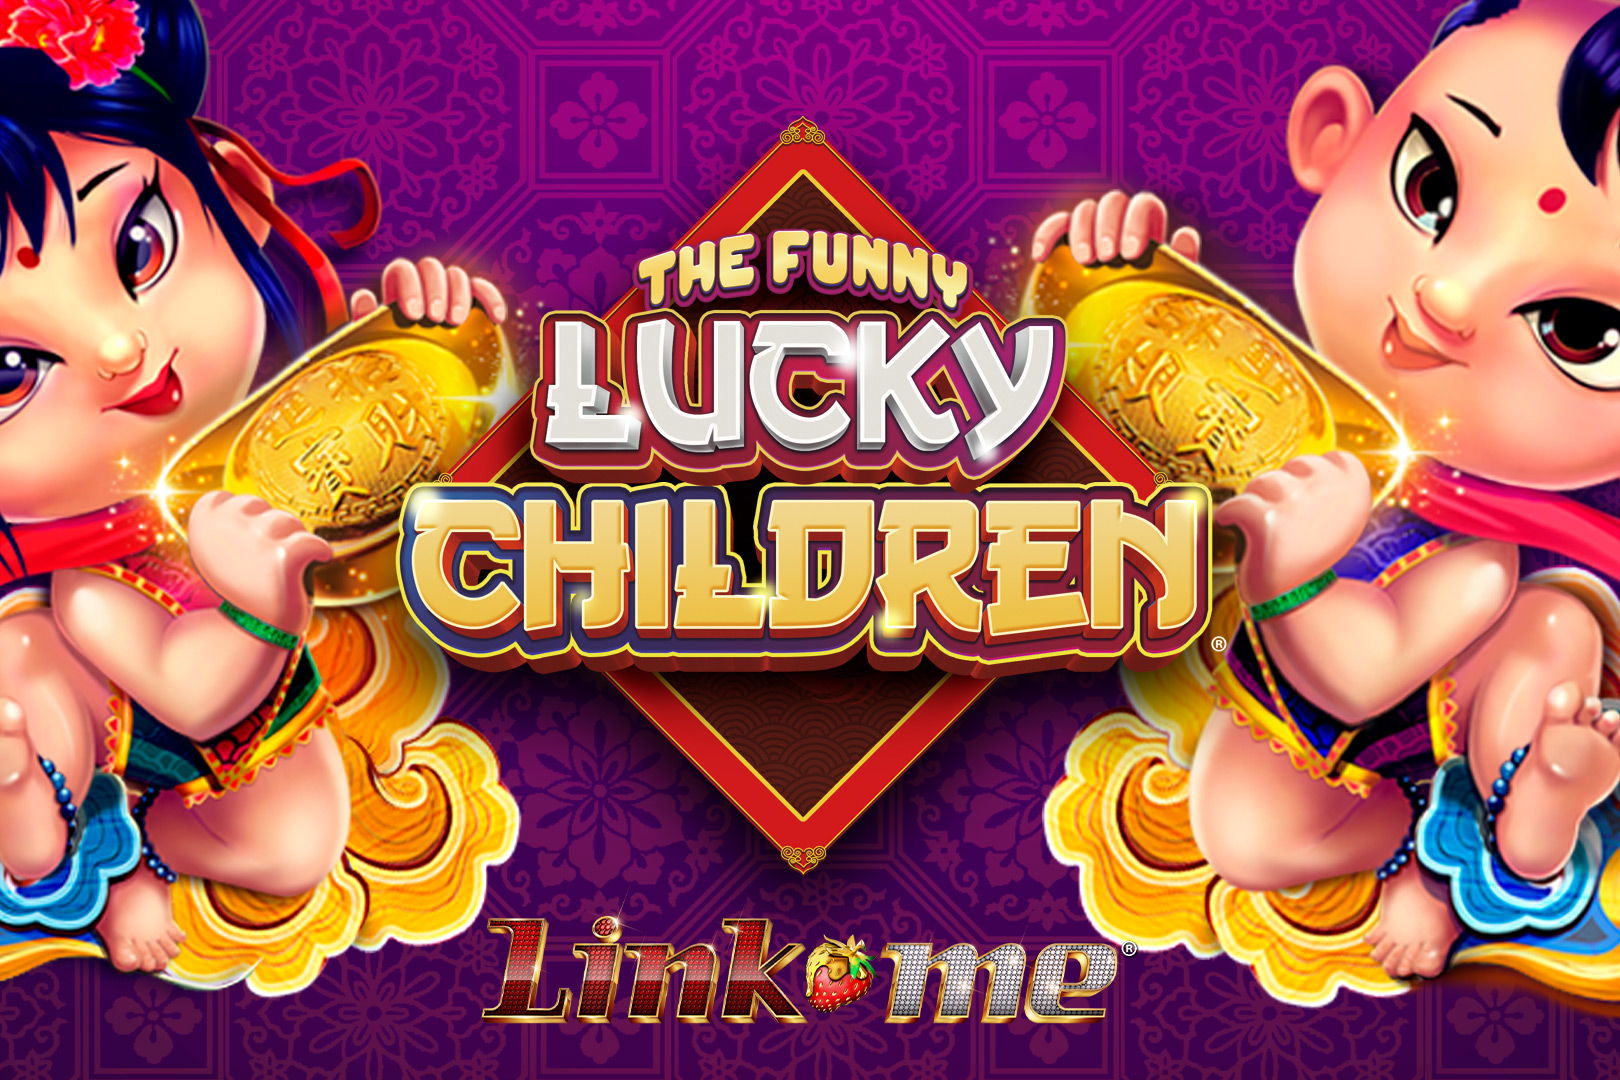 Link Me The Funny Lucky Children